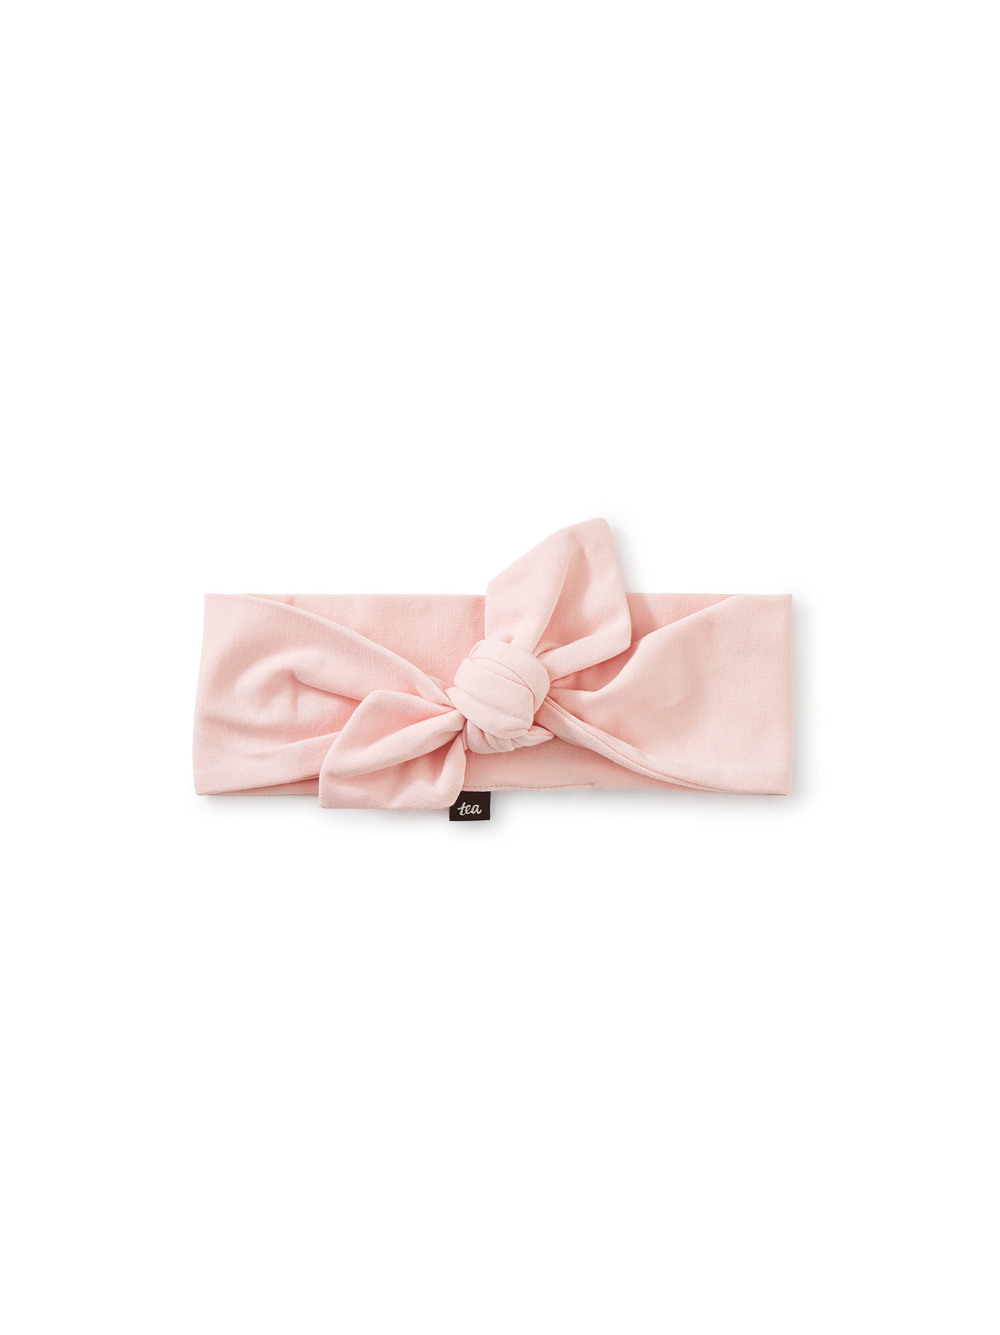 Wrapped In A Bow Baby Headband